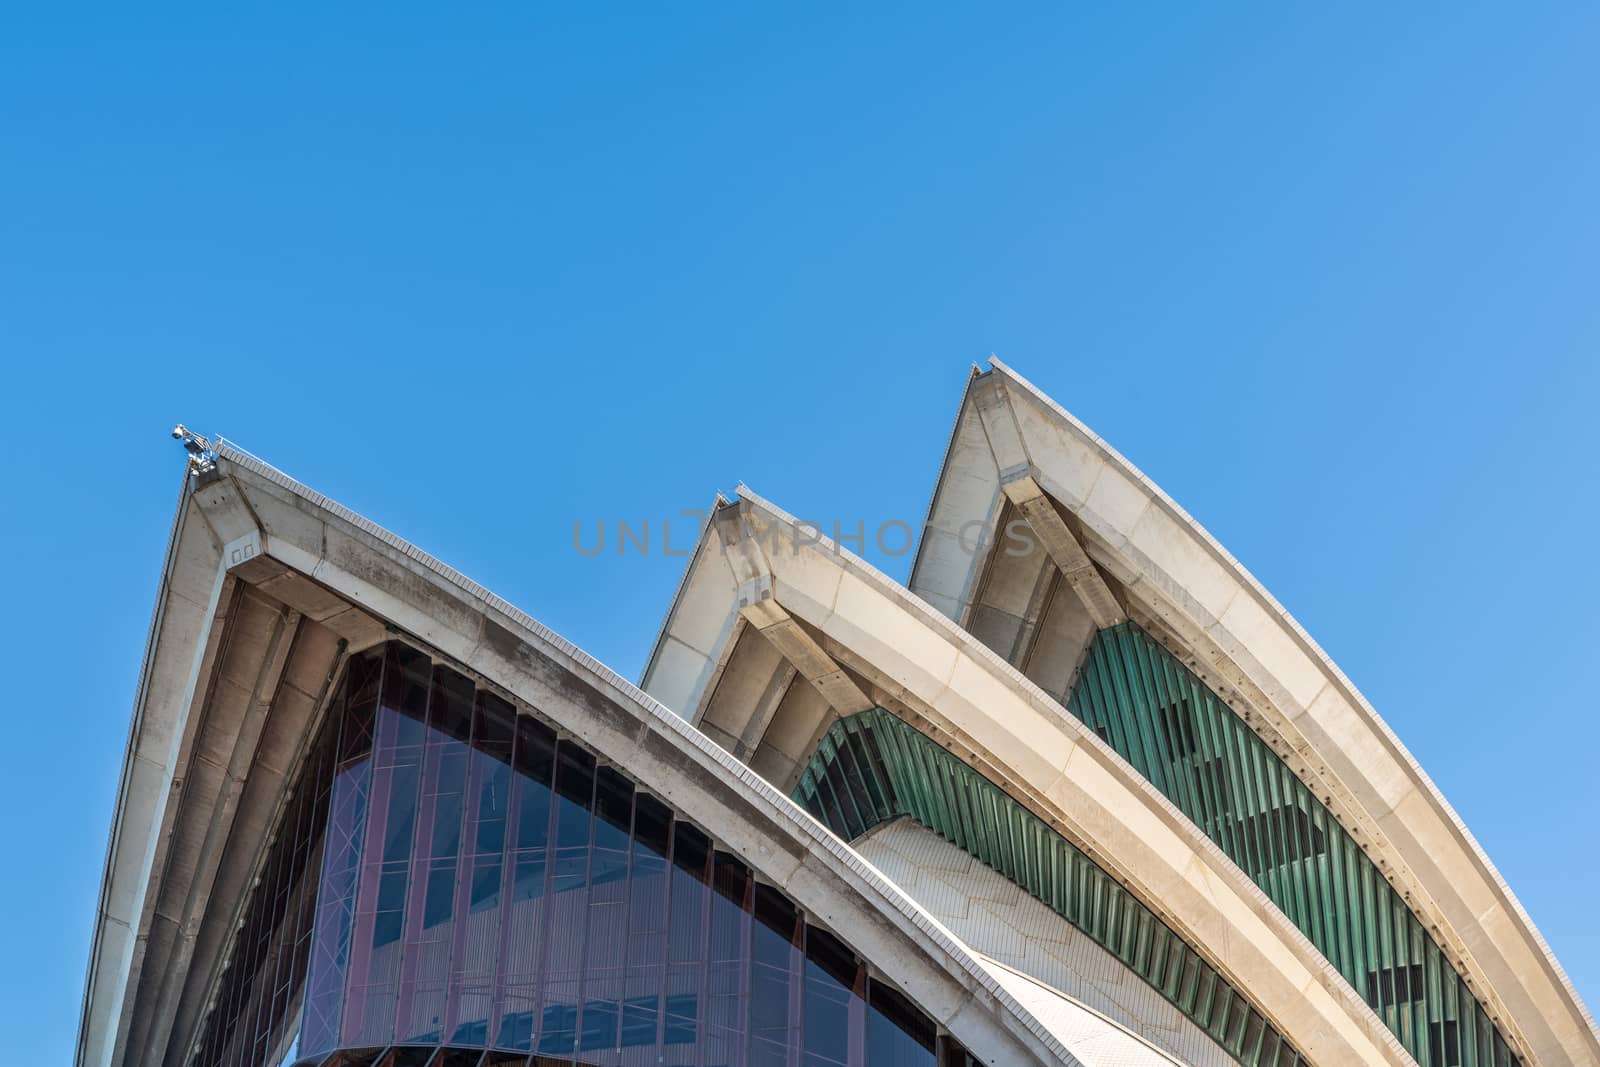 Sydney, Australia - February 11, 2019: Detail of white roof structure of Sydney Opera House against deep blue sky. 5 of 12.